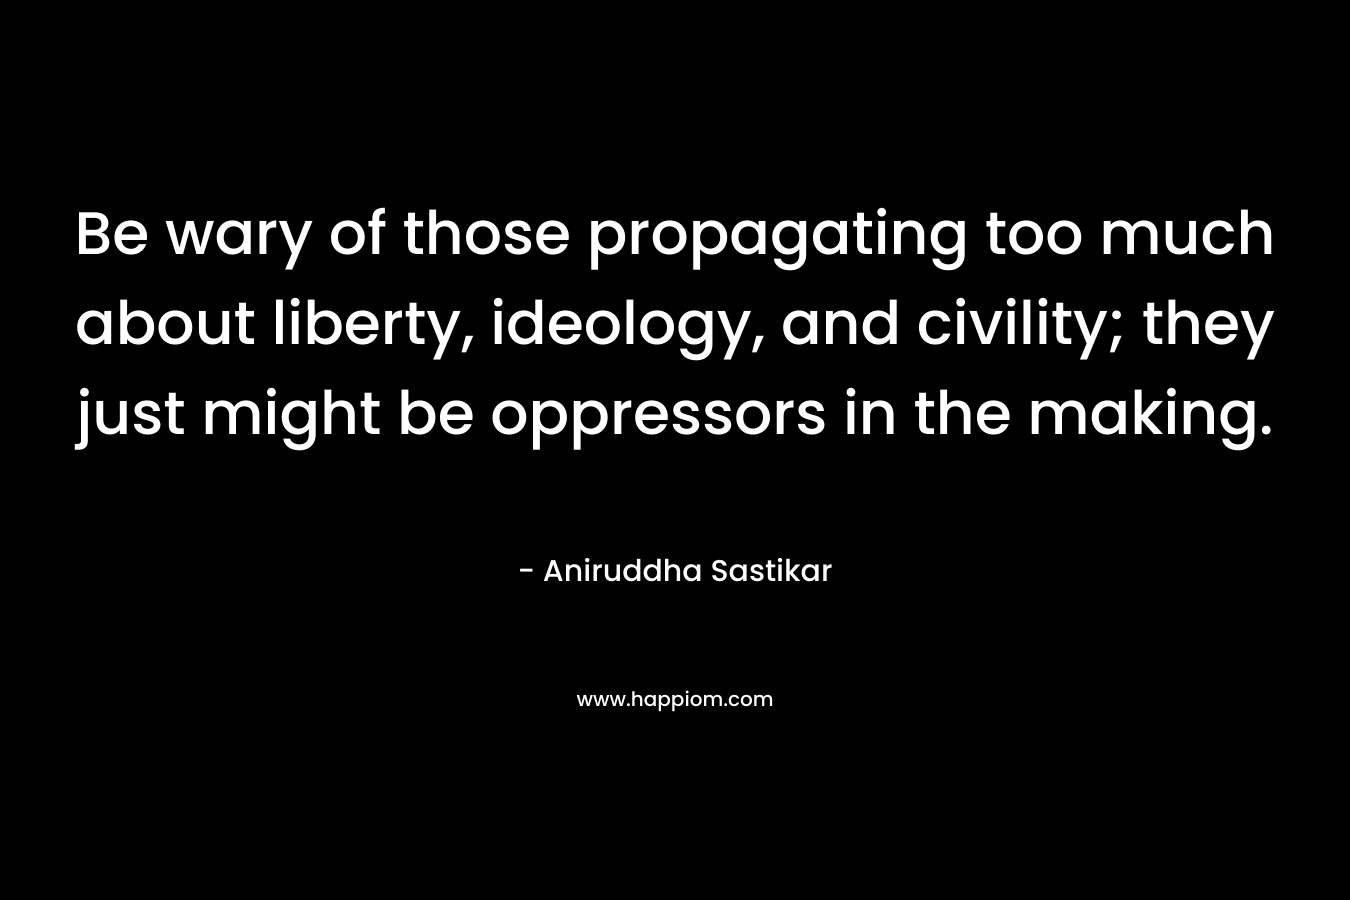 Be wary of those propagating too much about liberty, ideology, and civility; they just might be oppressors in the making.